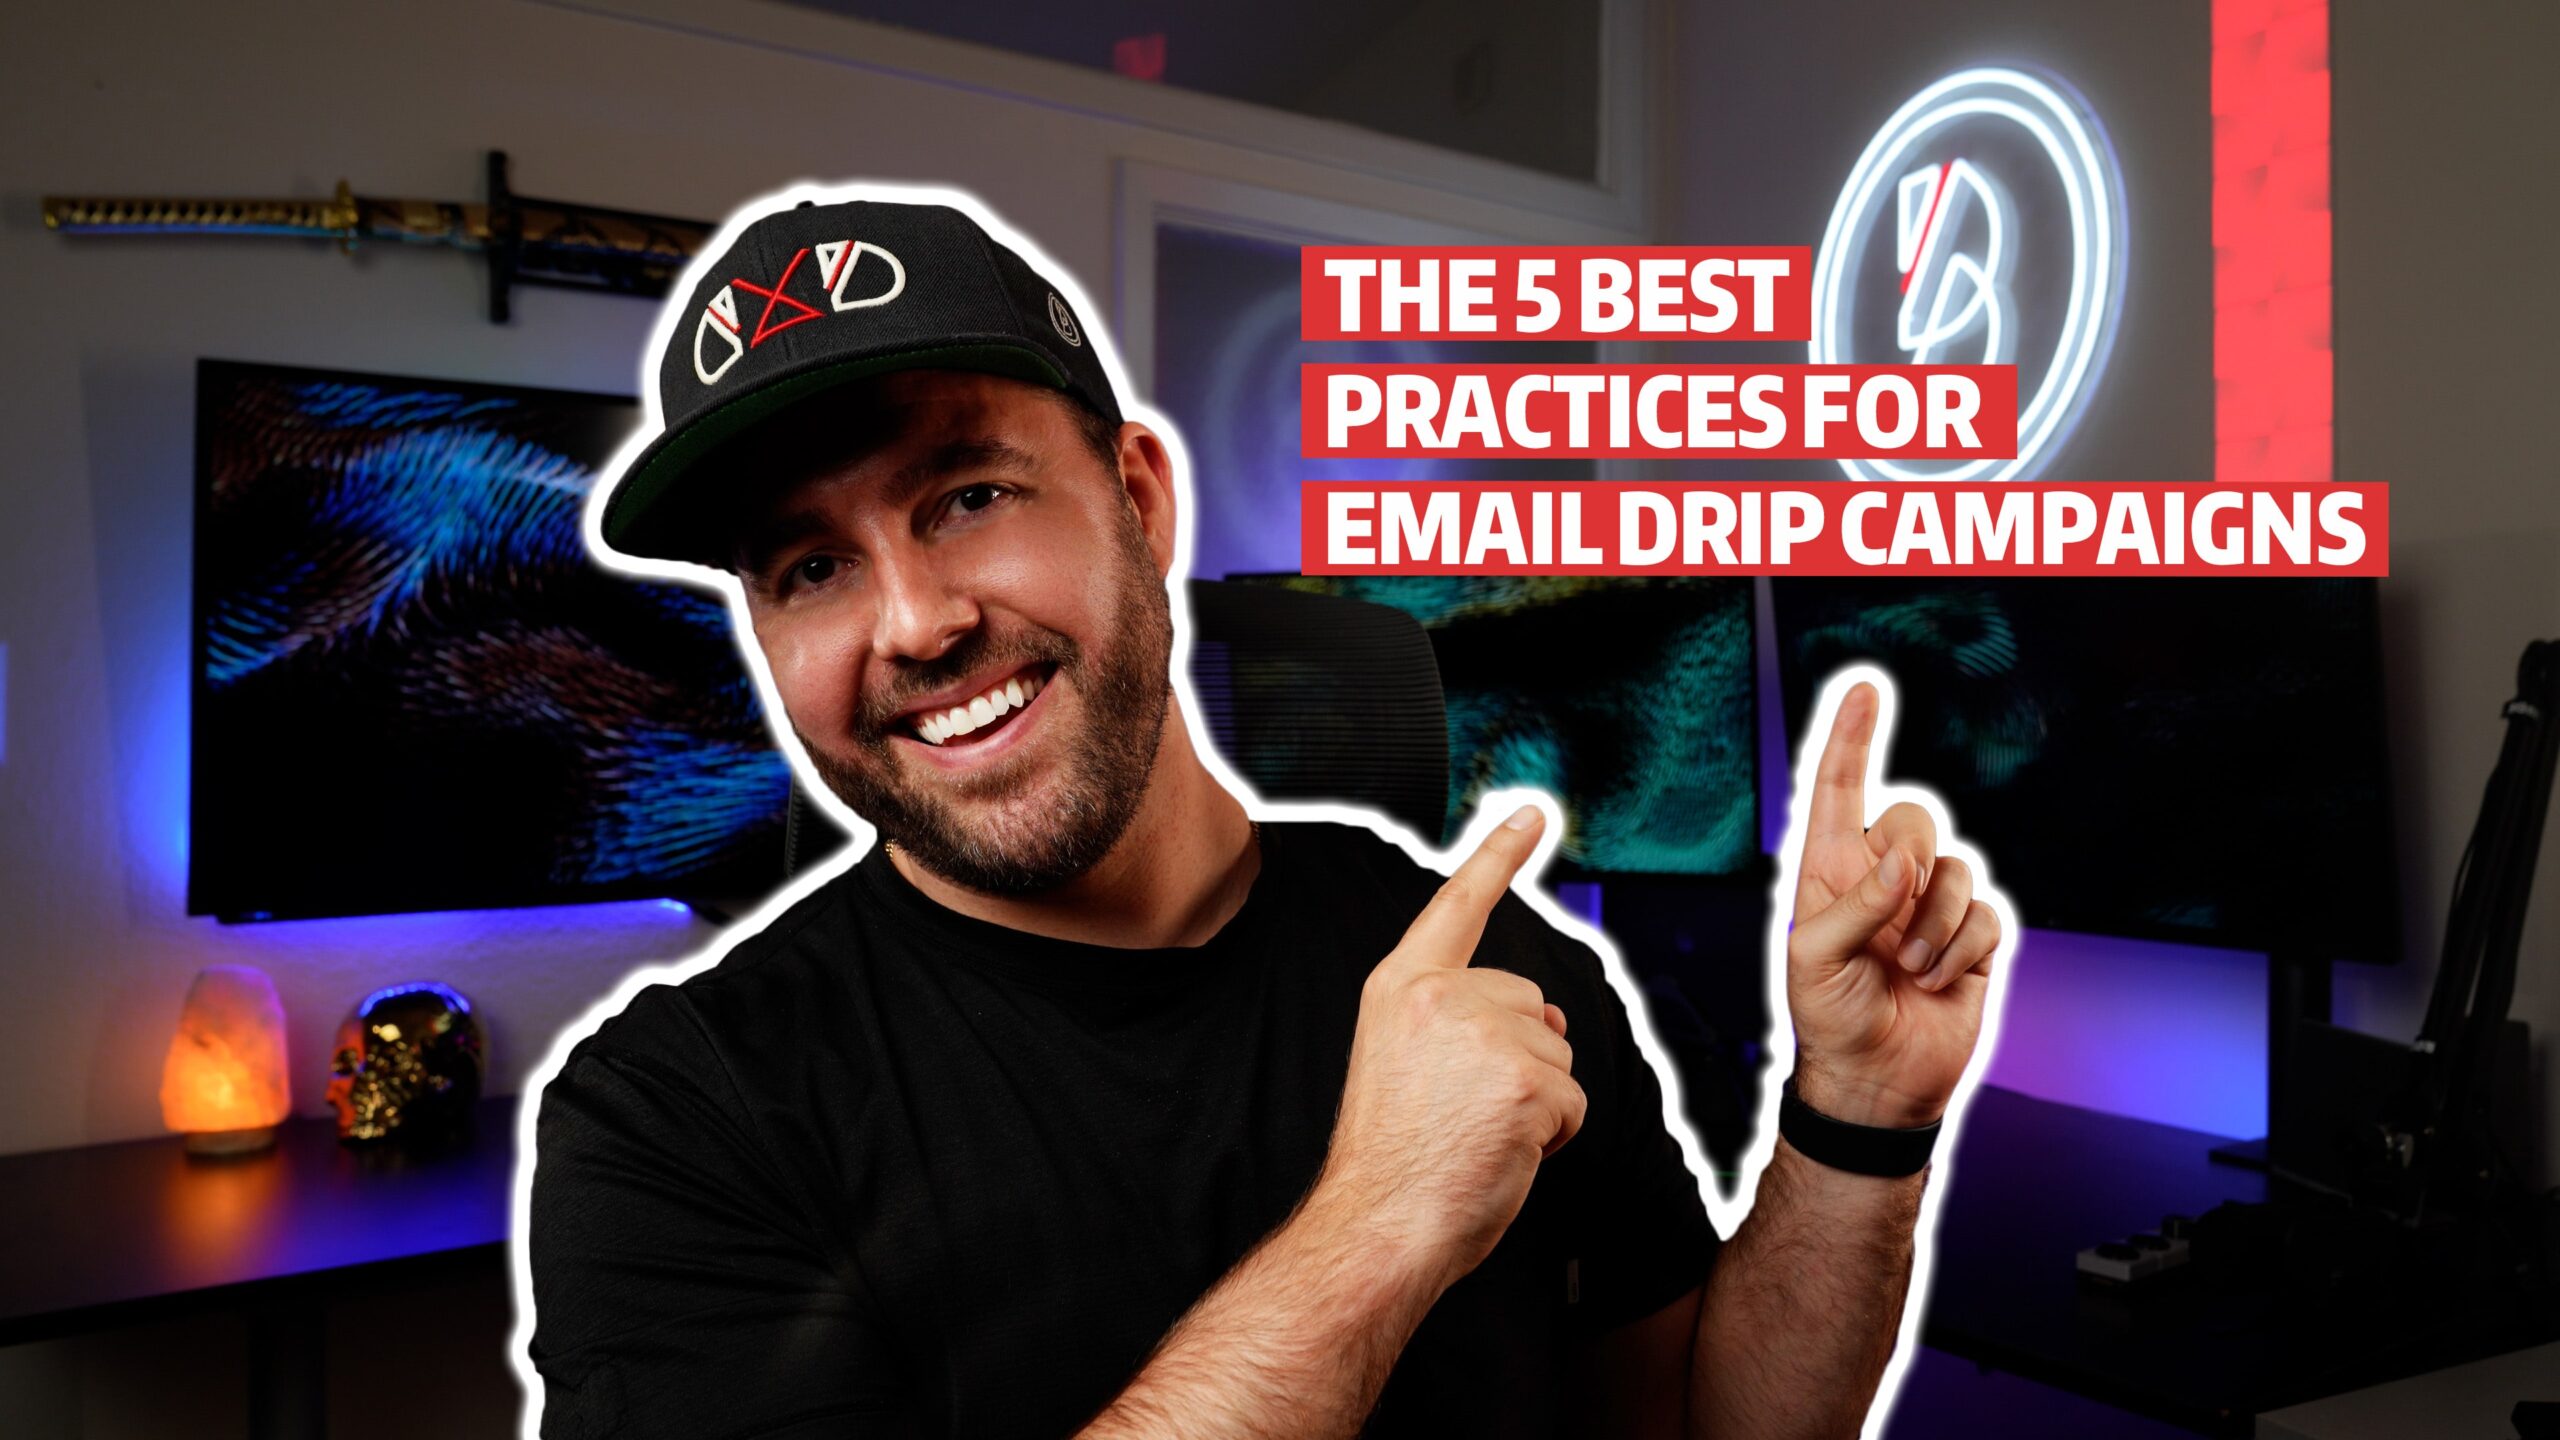 The 5 Best Practices For Email Drip Campaigns